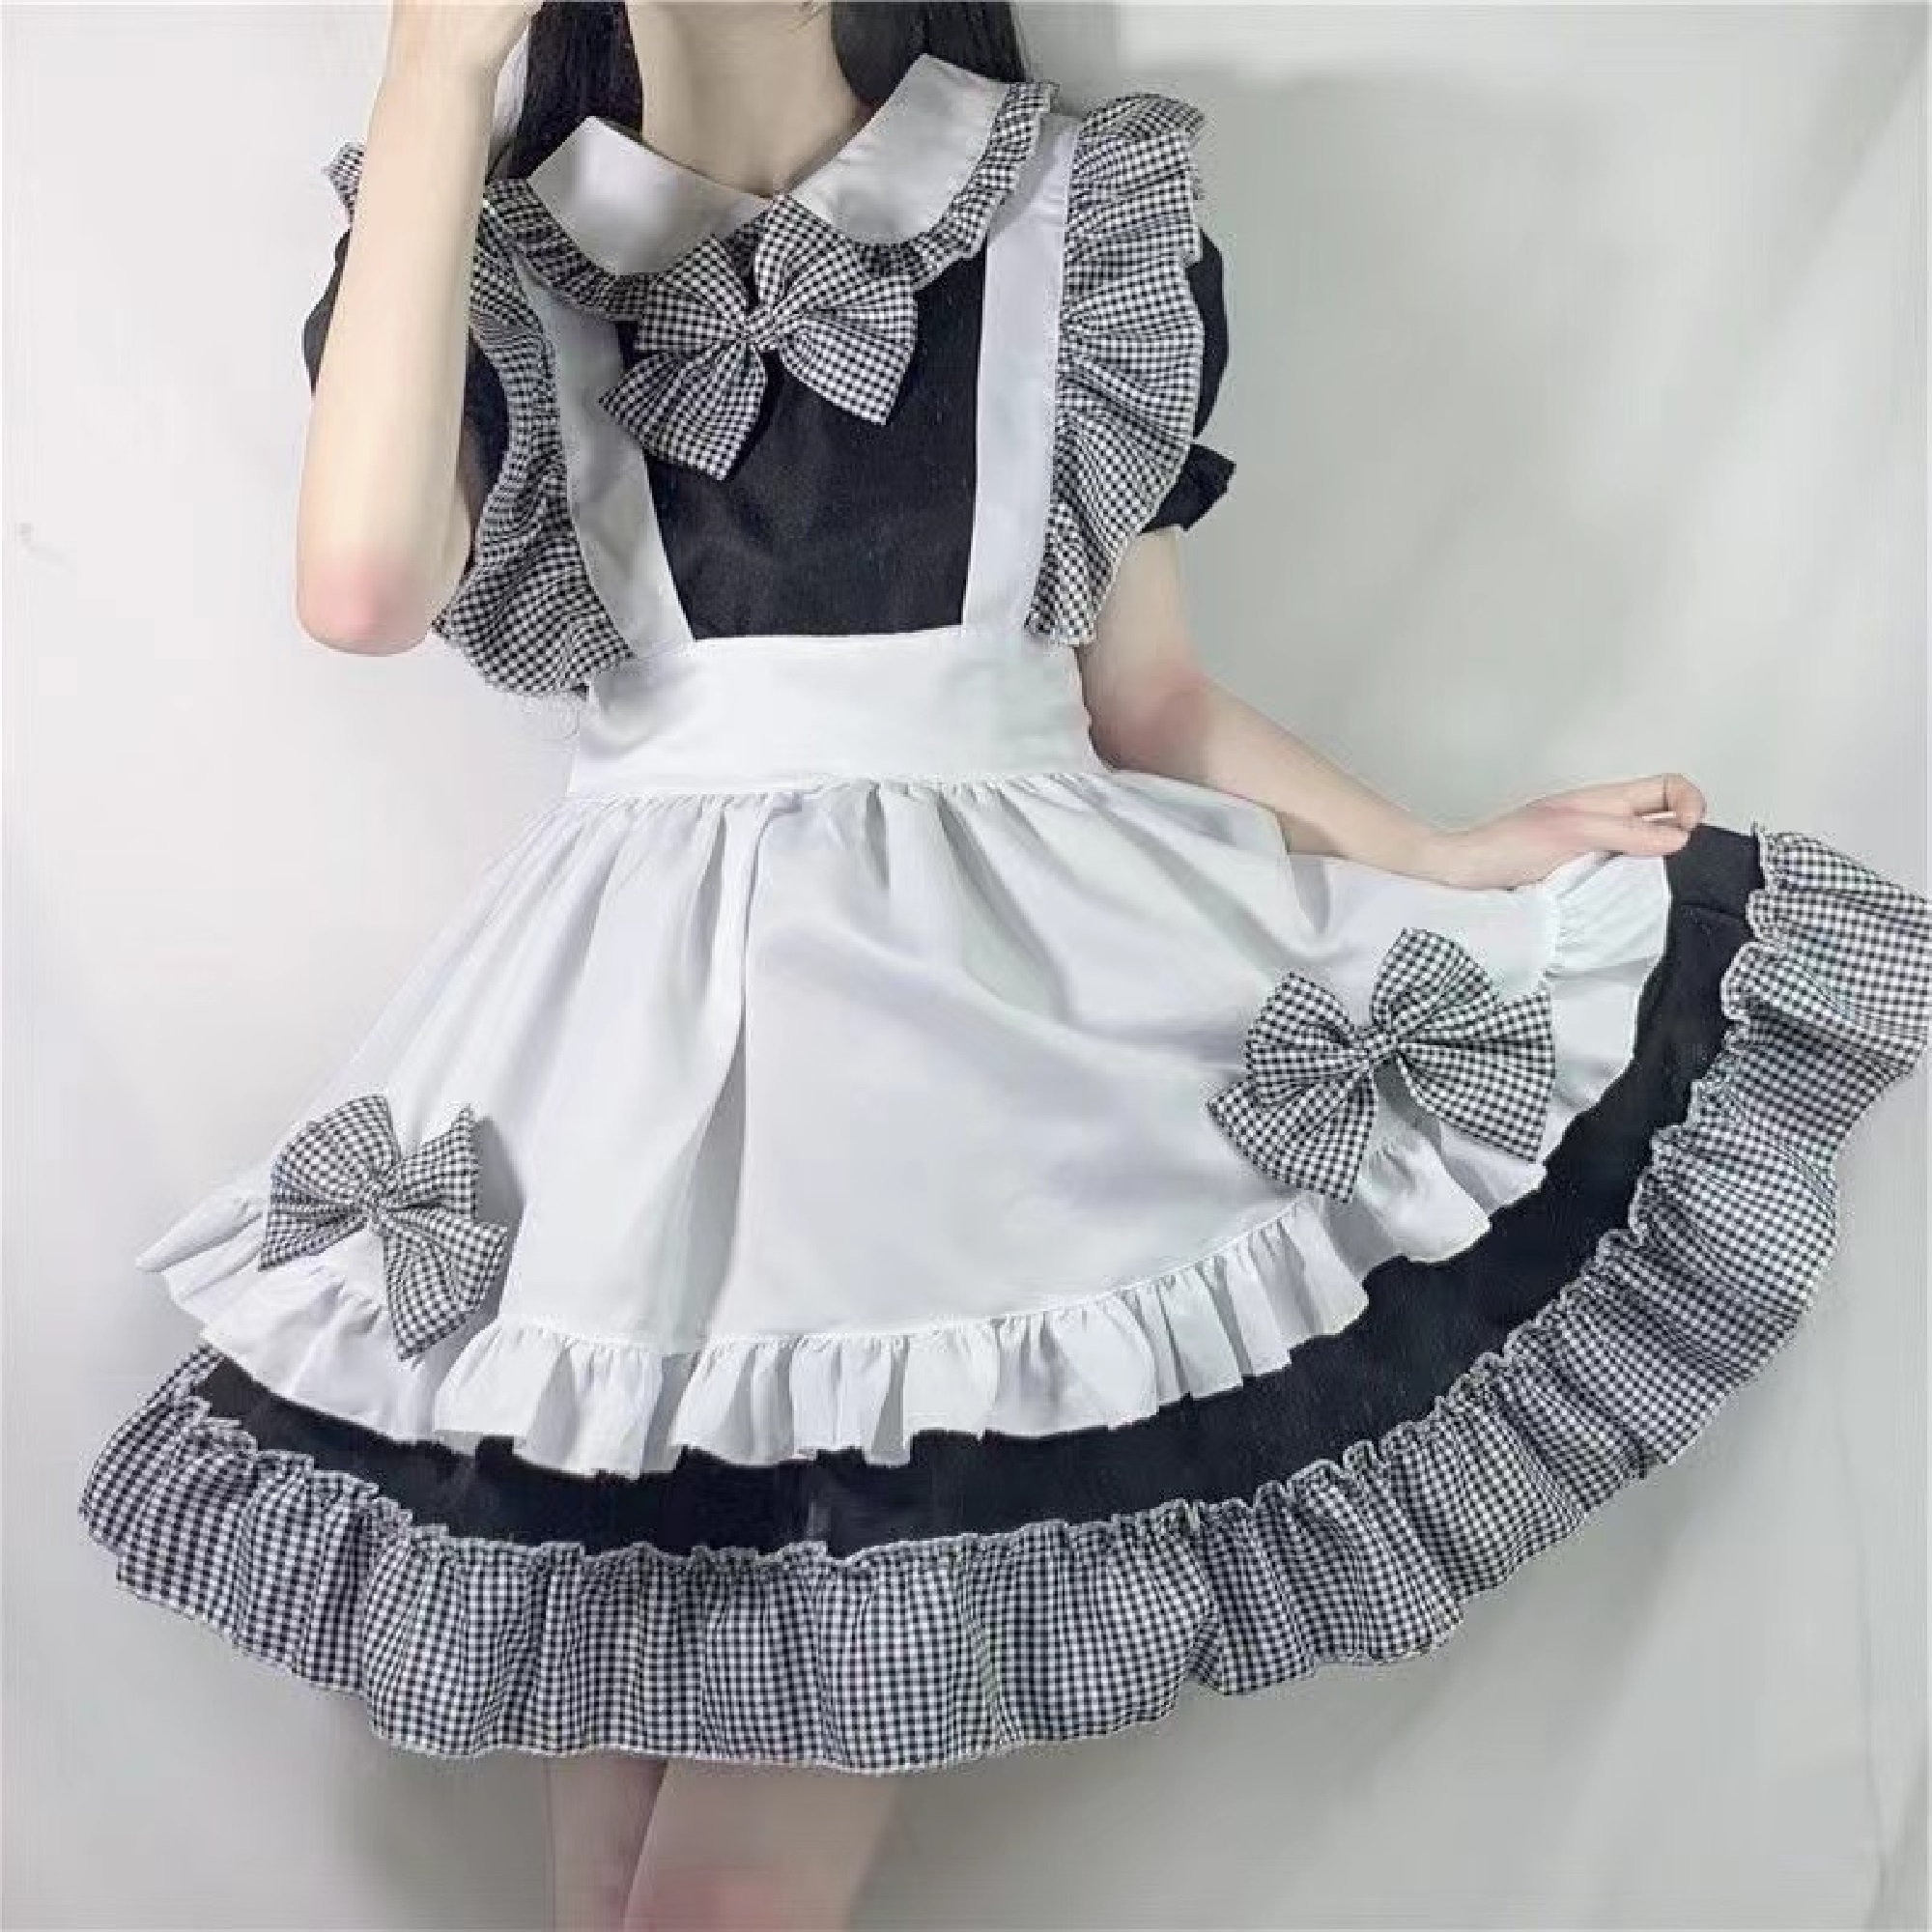 Y2K French Maid Dress - White Lolita Costume for Cosplay & Parties